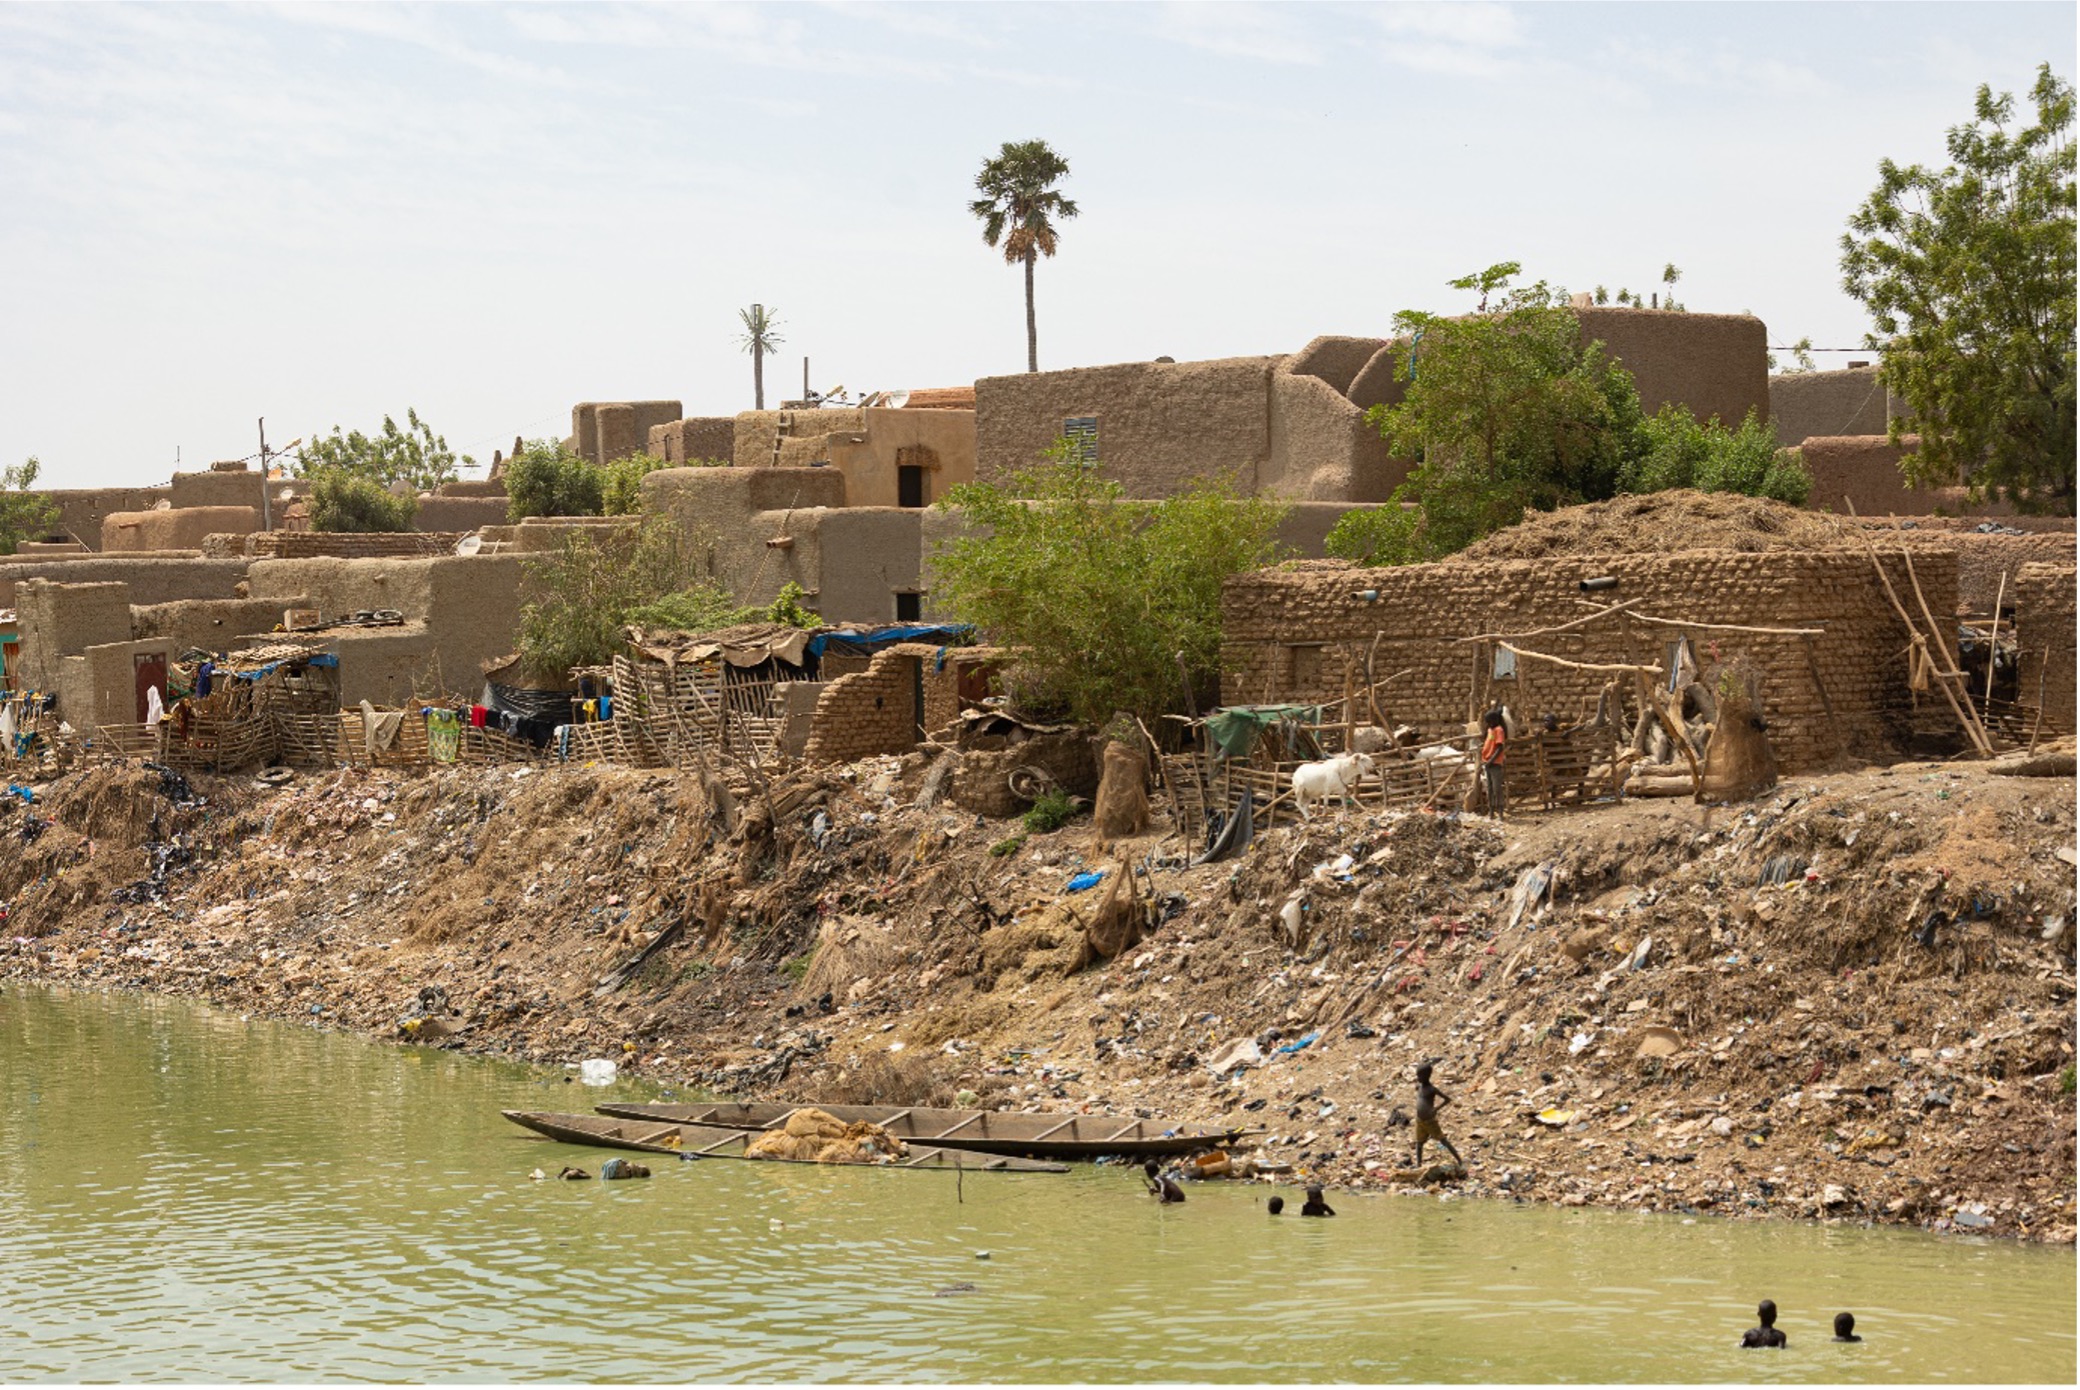 Inhabitants of Djenné swimming on the banks of the Niger River